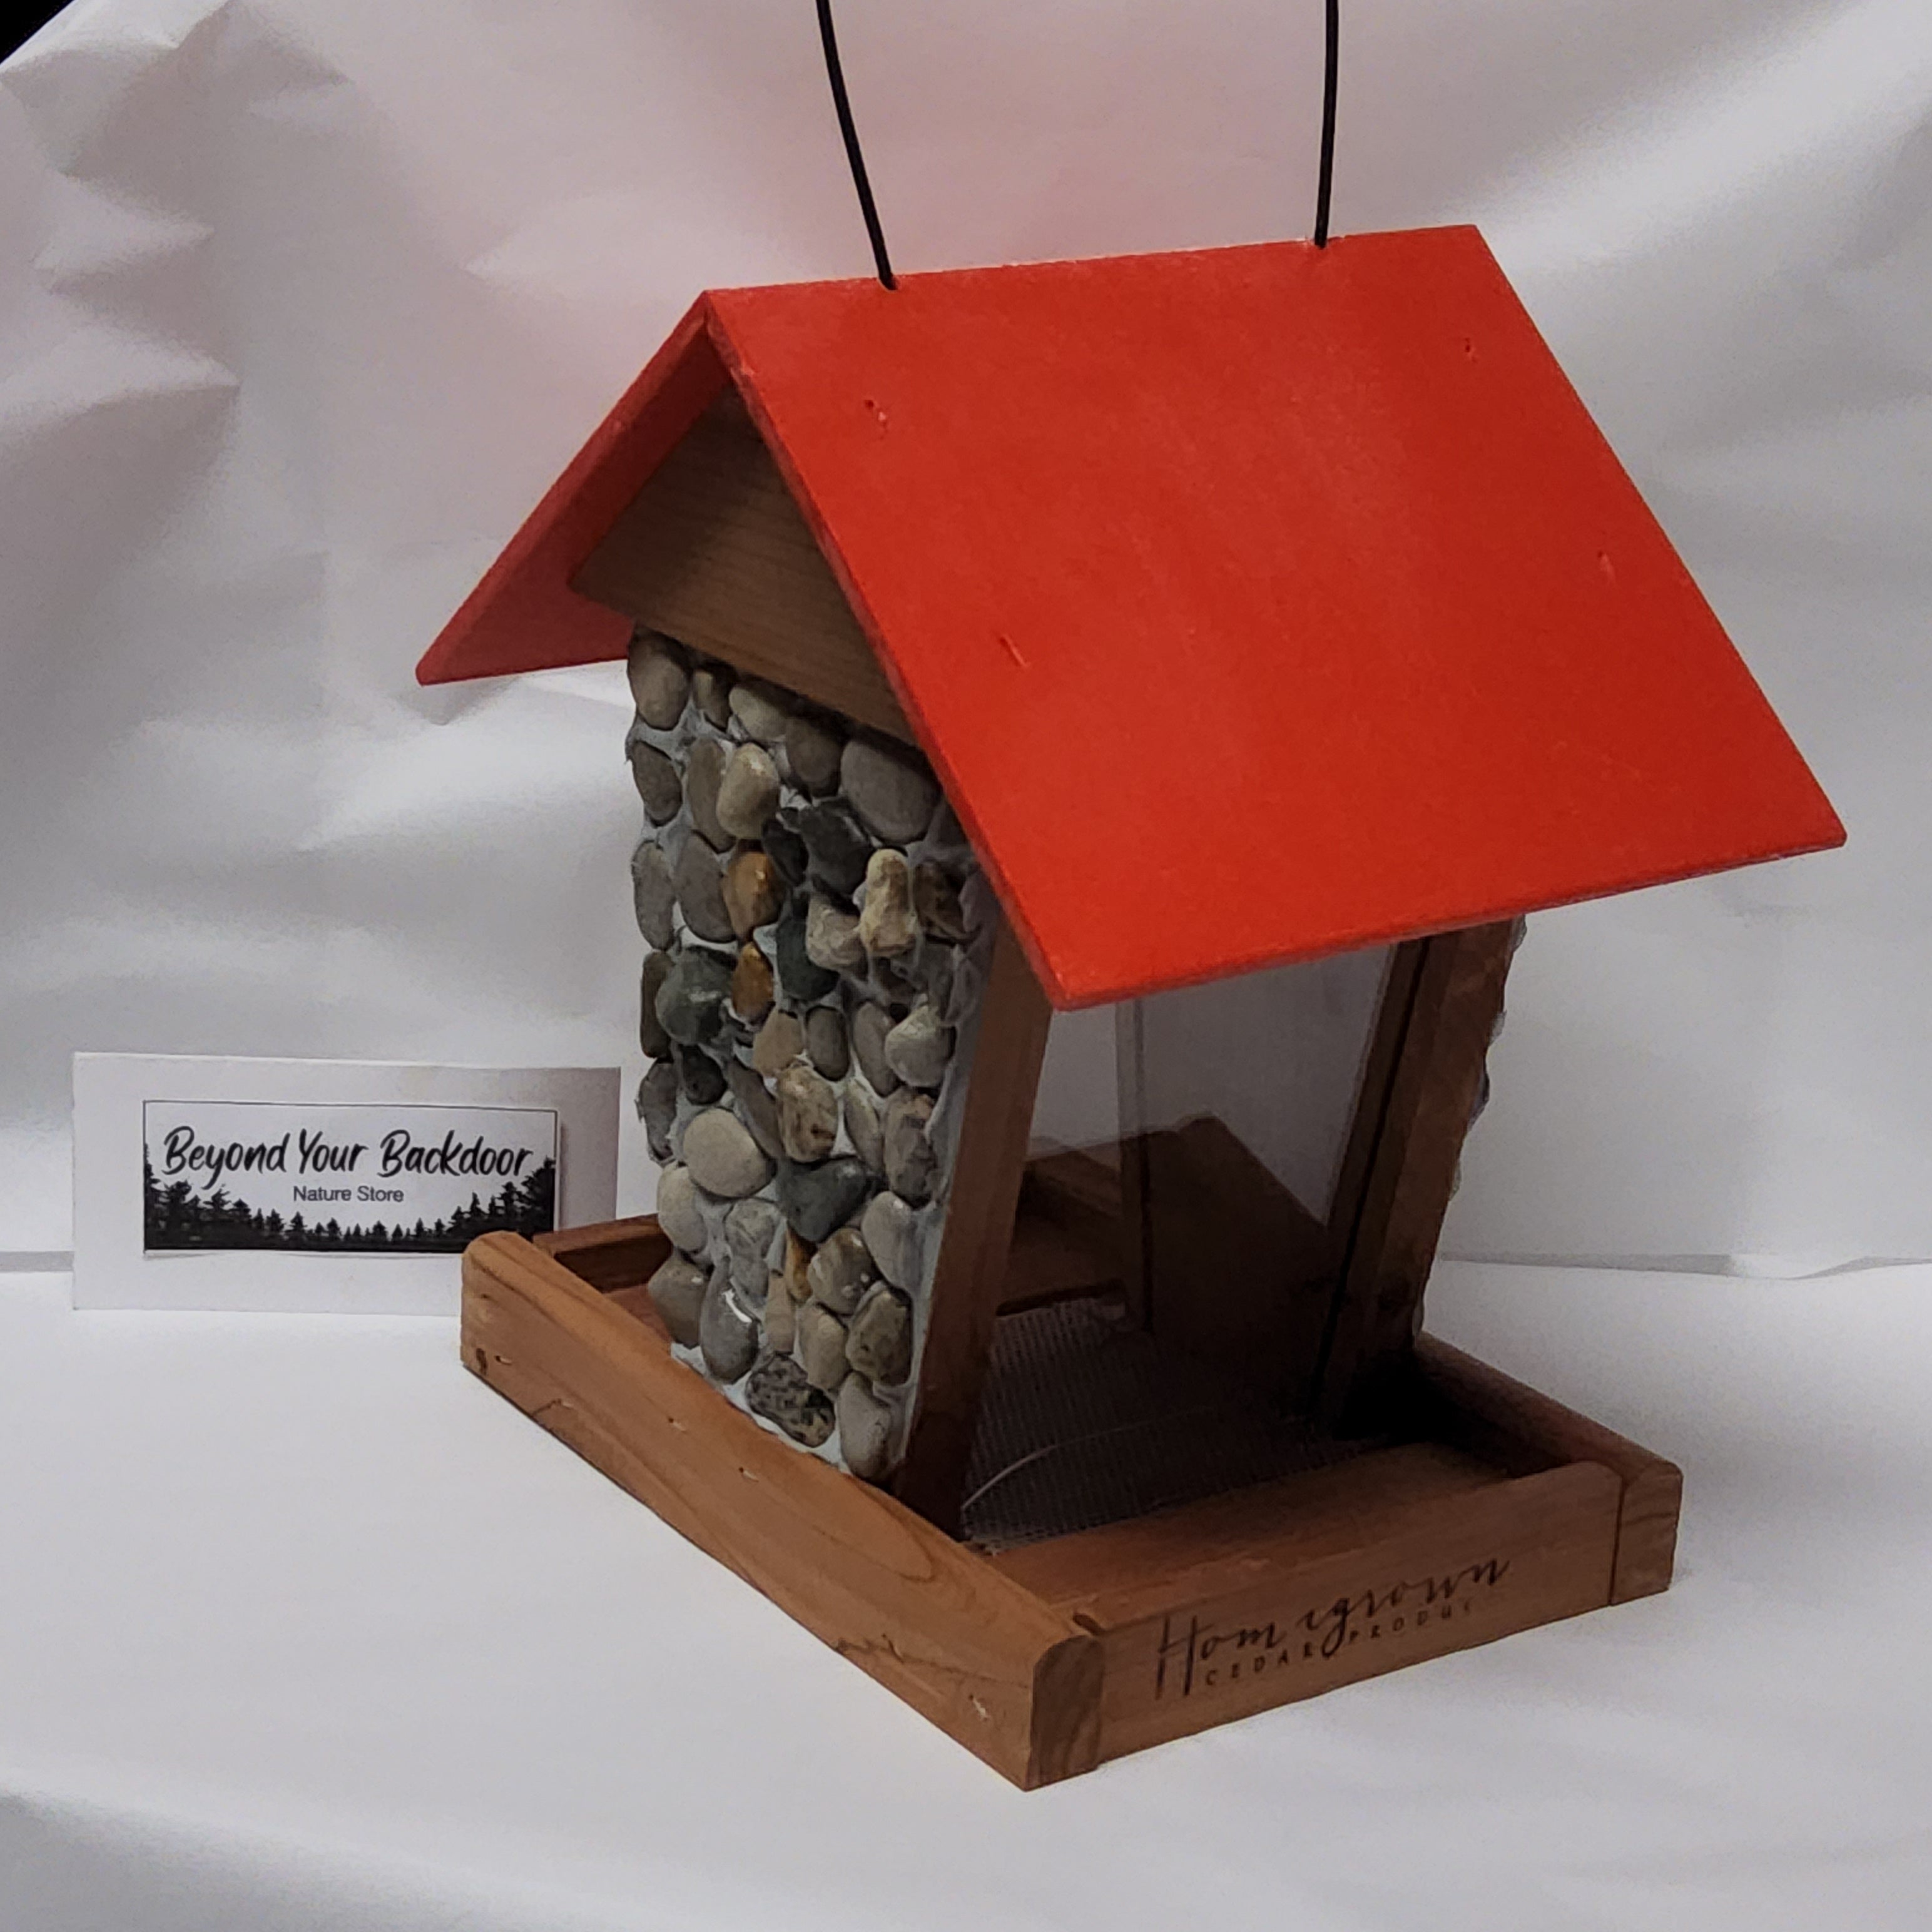 Bird Feeder - Stone sides with red roof